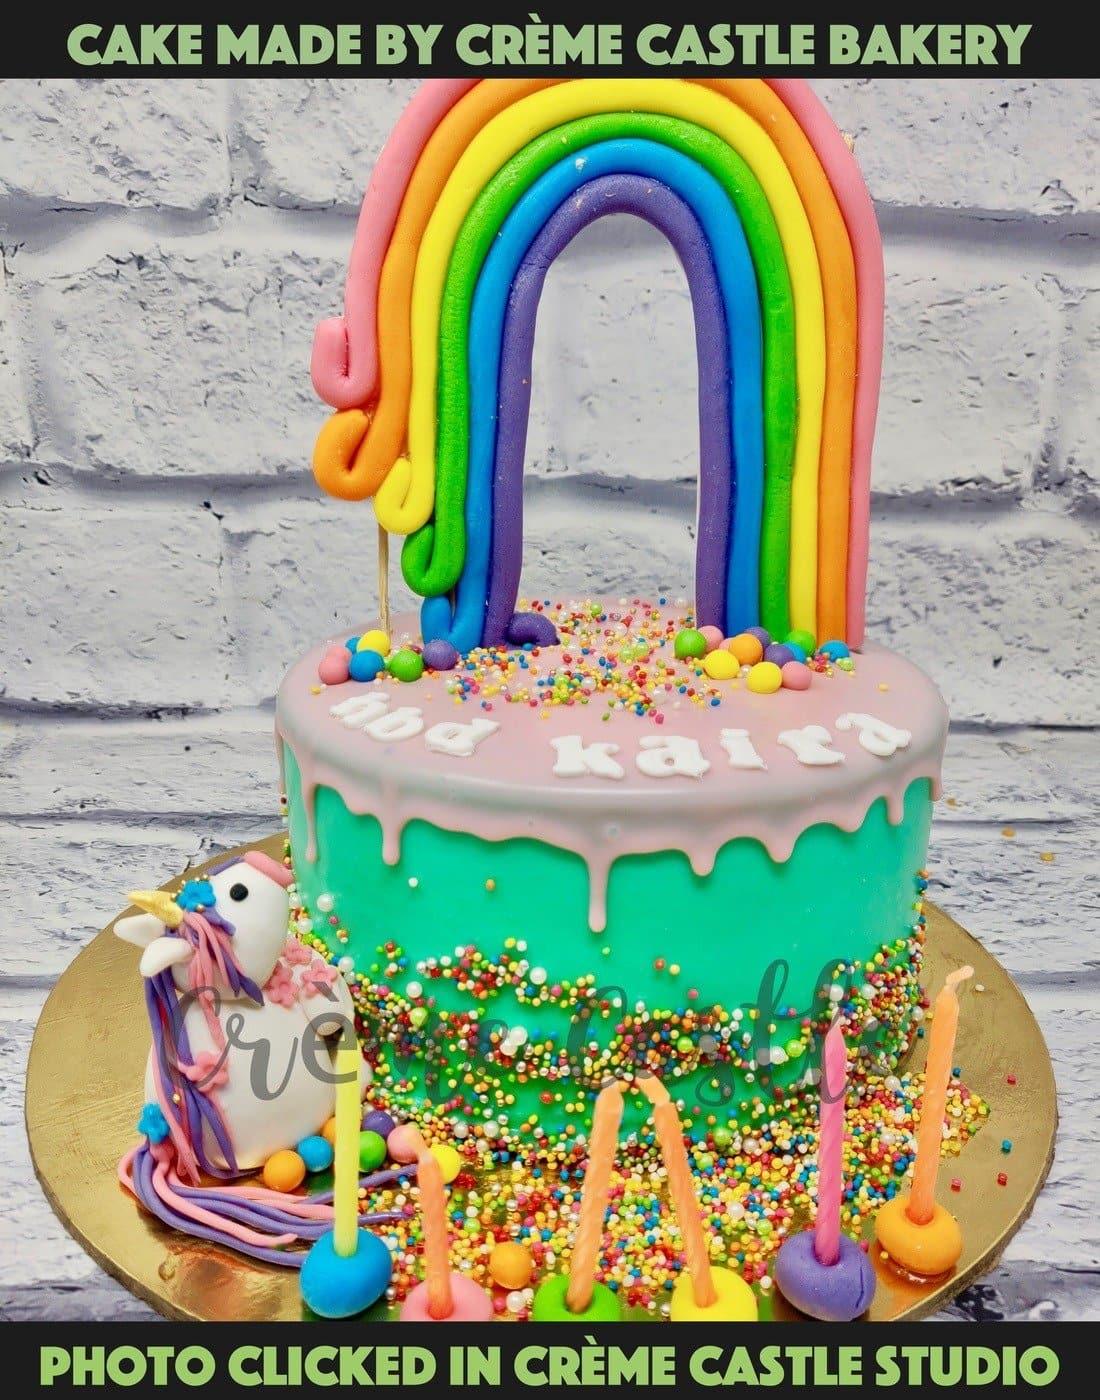 Rainbow Cake Recipe with Four Cake Layers - Chelsweets